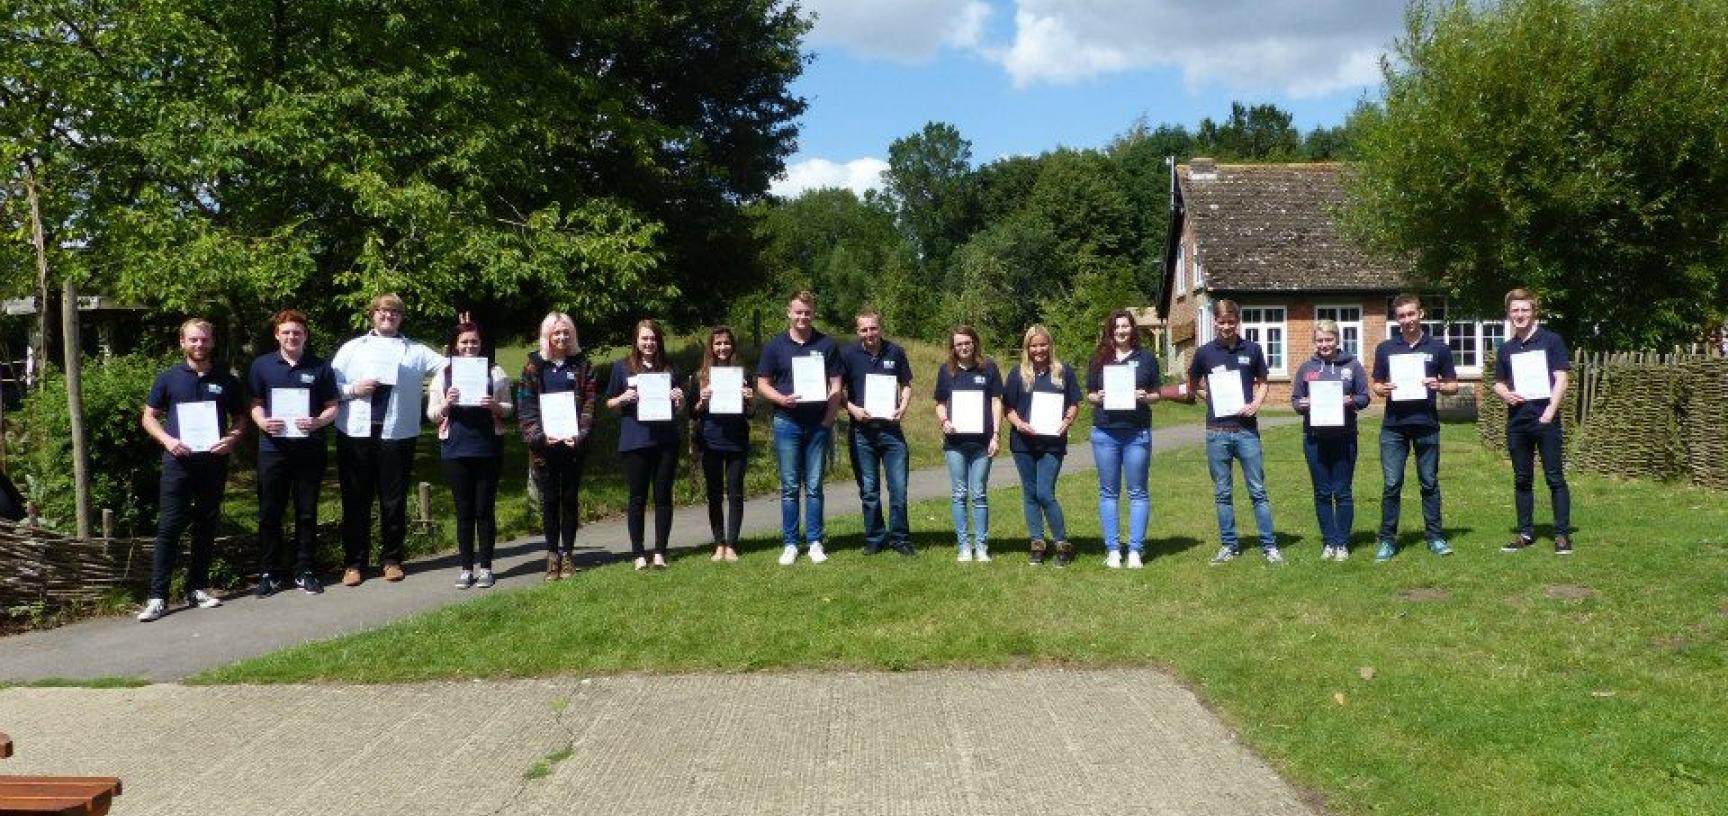 Apprentices receiving their certificates